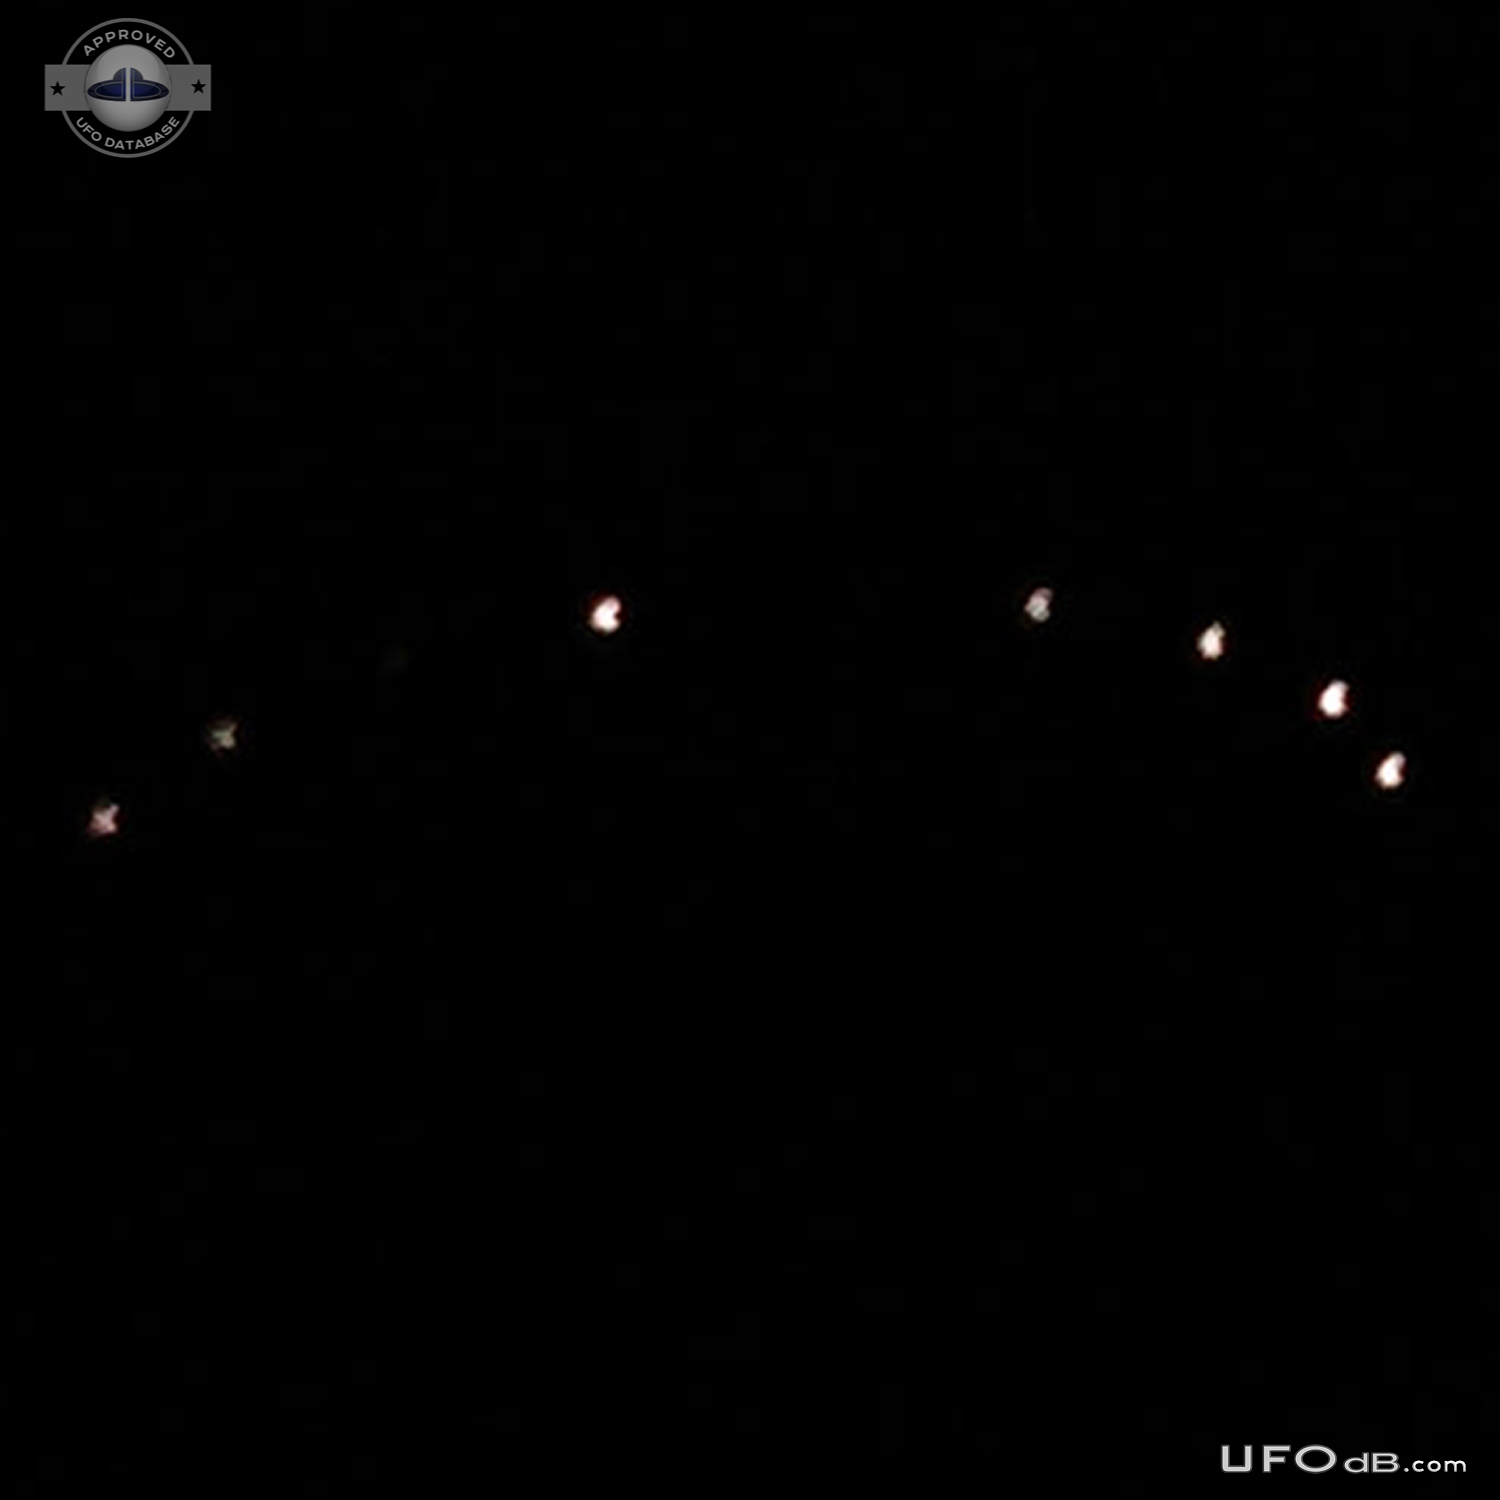 Series of UFOs above the mountains in Portland, Oregon USA 2015 UFO Picture #627-3